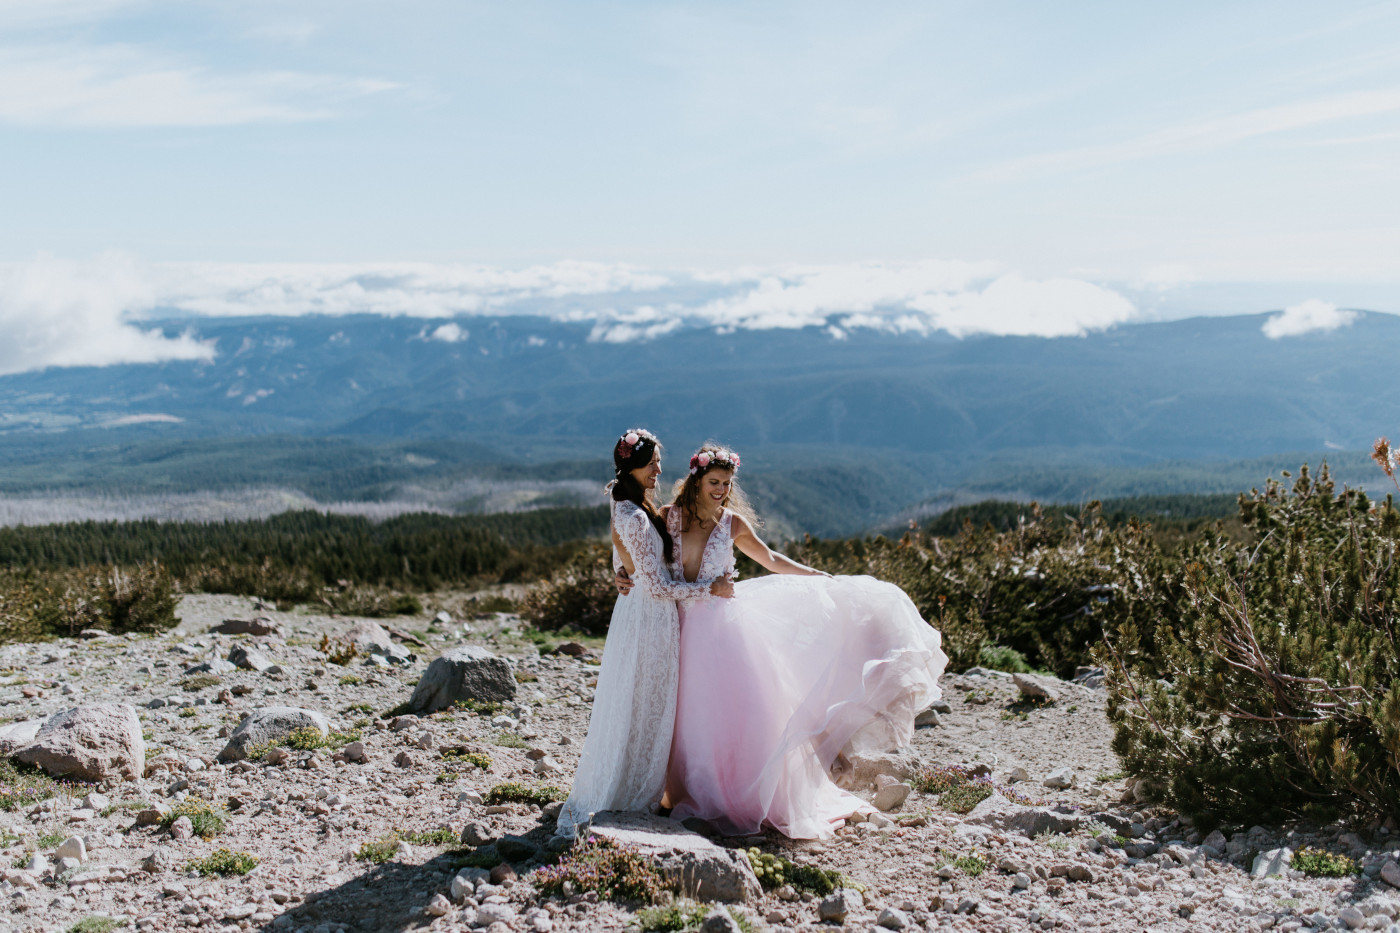 Heather and Margaux standing with the view from Mount Hood. Elopement photography at Mount Hood by Sienna Plus Josh.